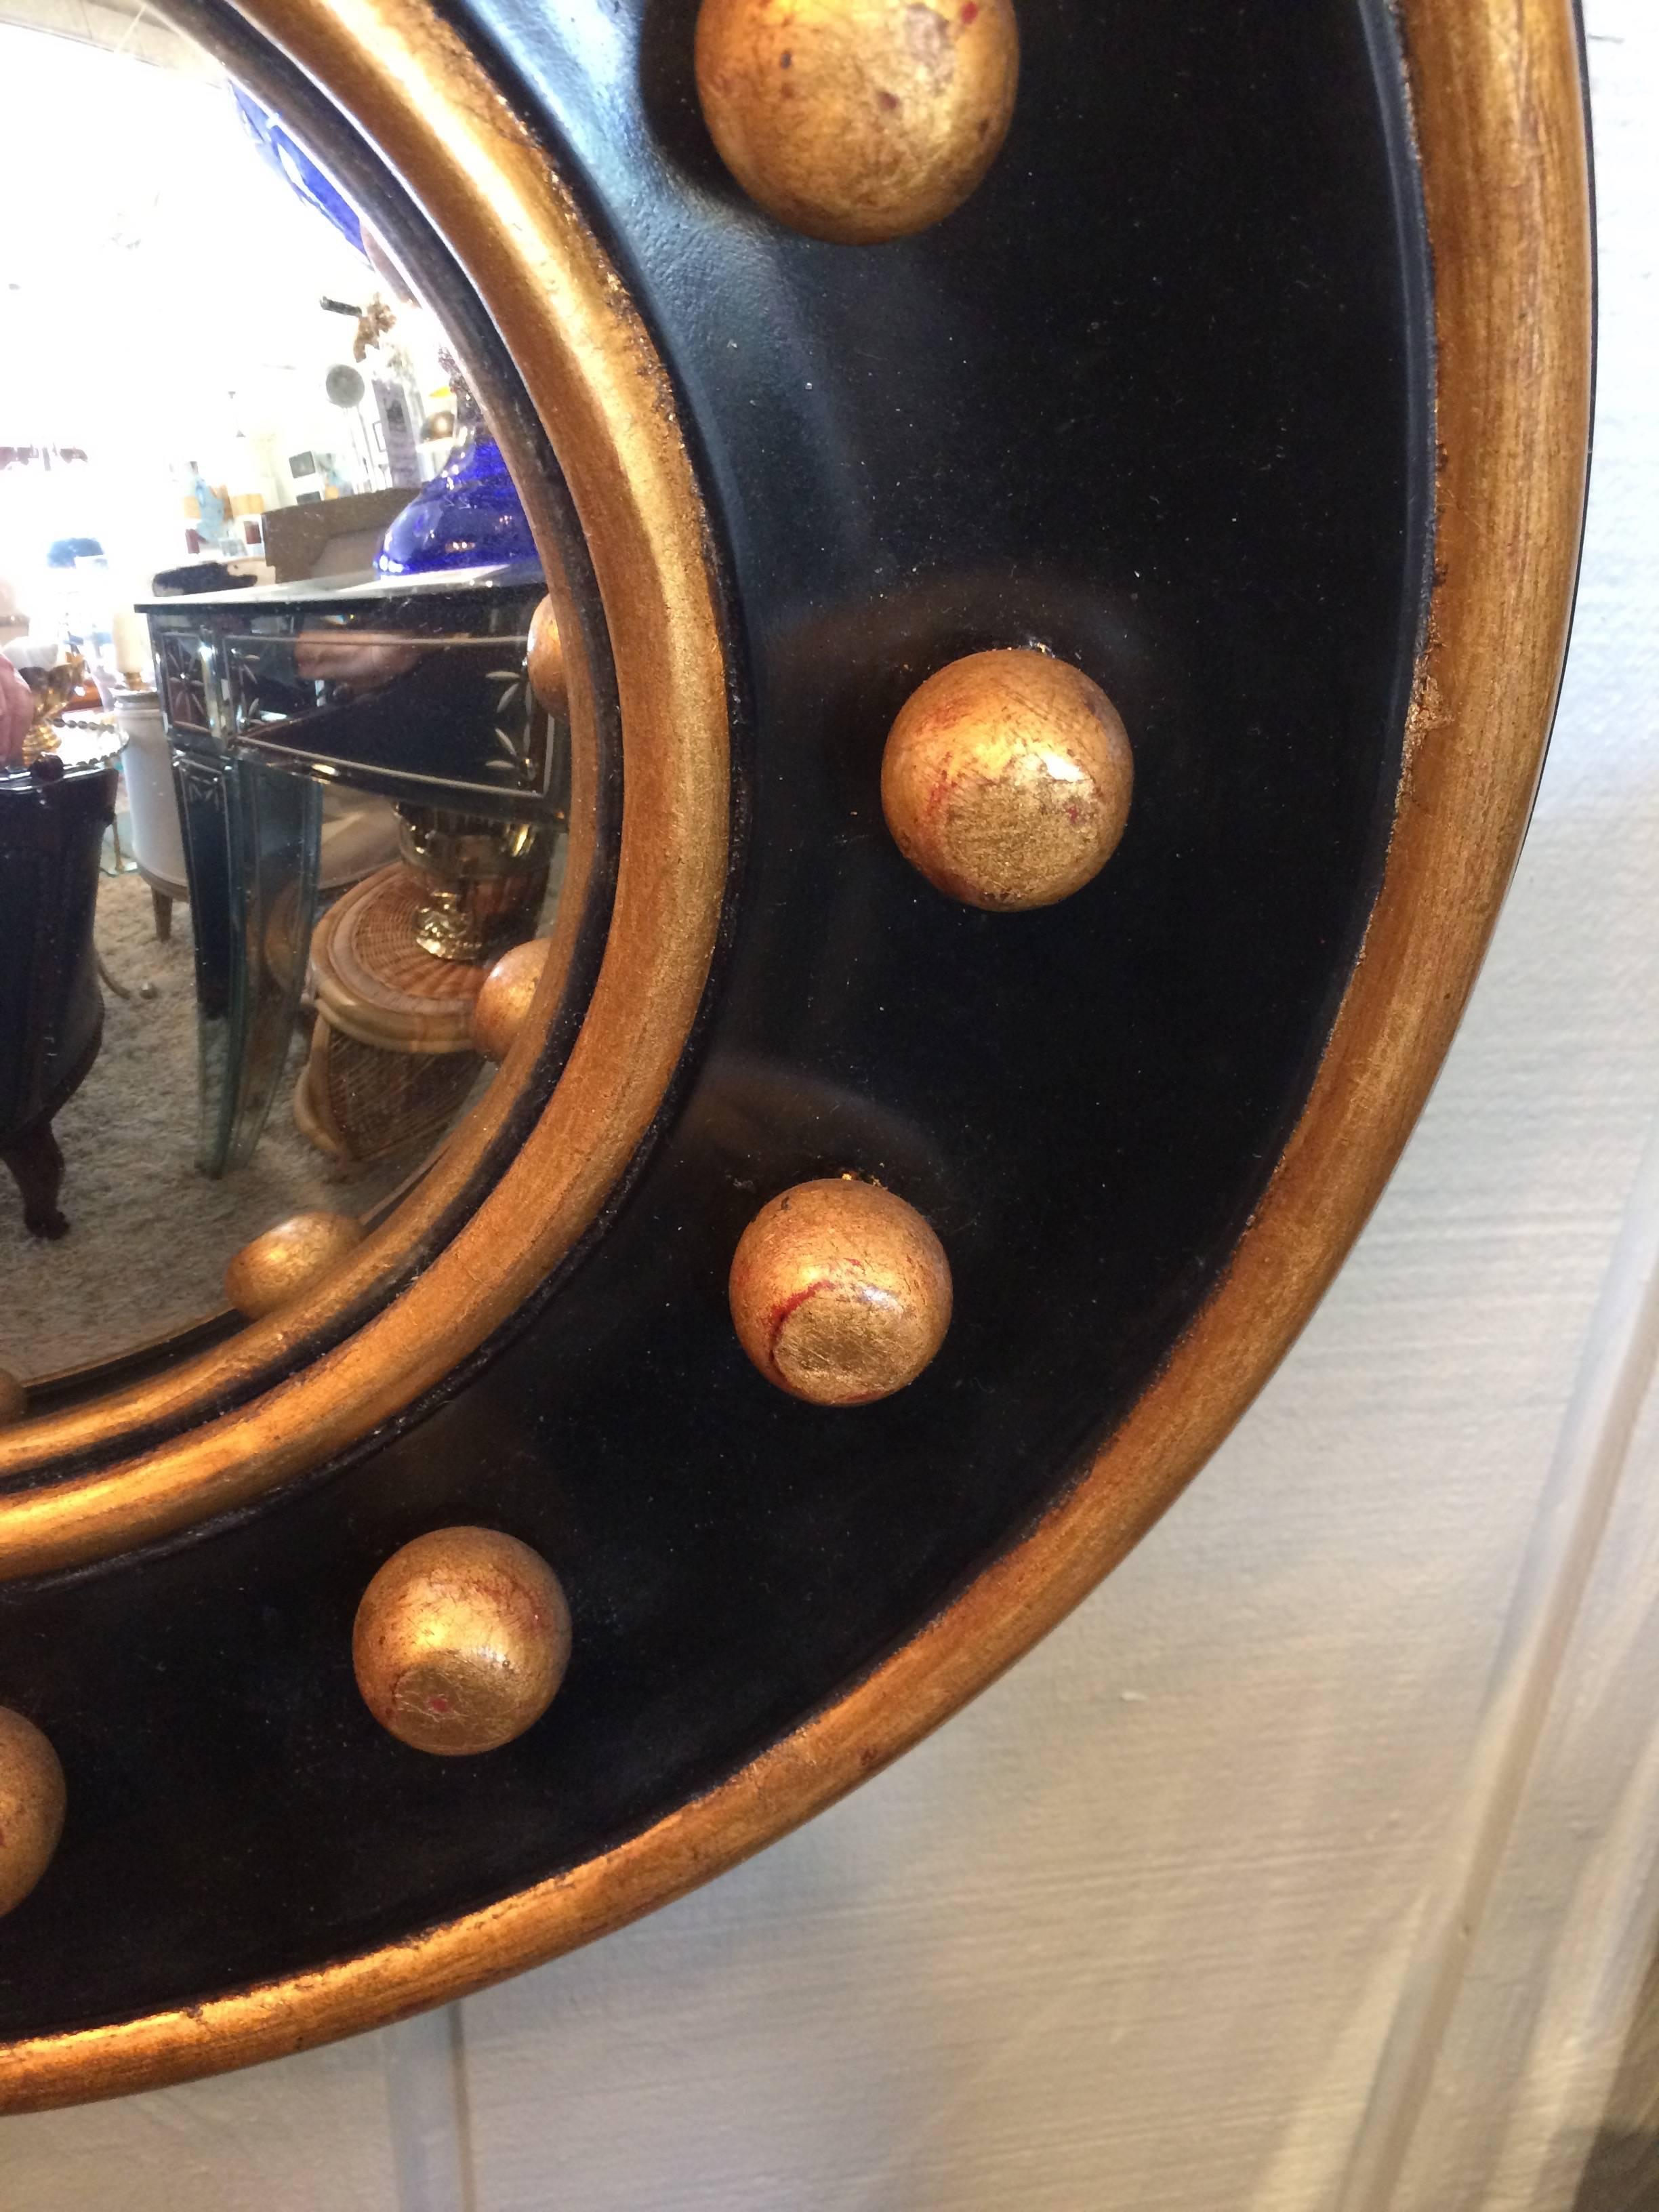 Powerful little wall mirror in a Regency style black and gold wood having three dimensional gold balls around a small convex mirror and gold border. You can tell by the back that it has age. Mirror itself measures 6.5 diameter.